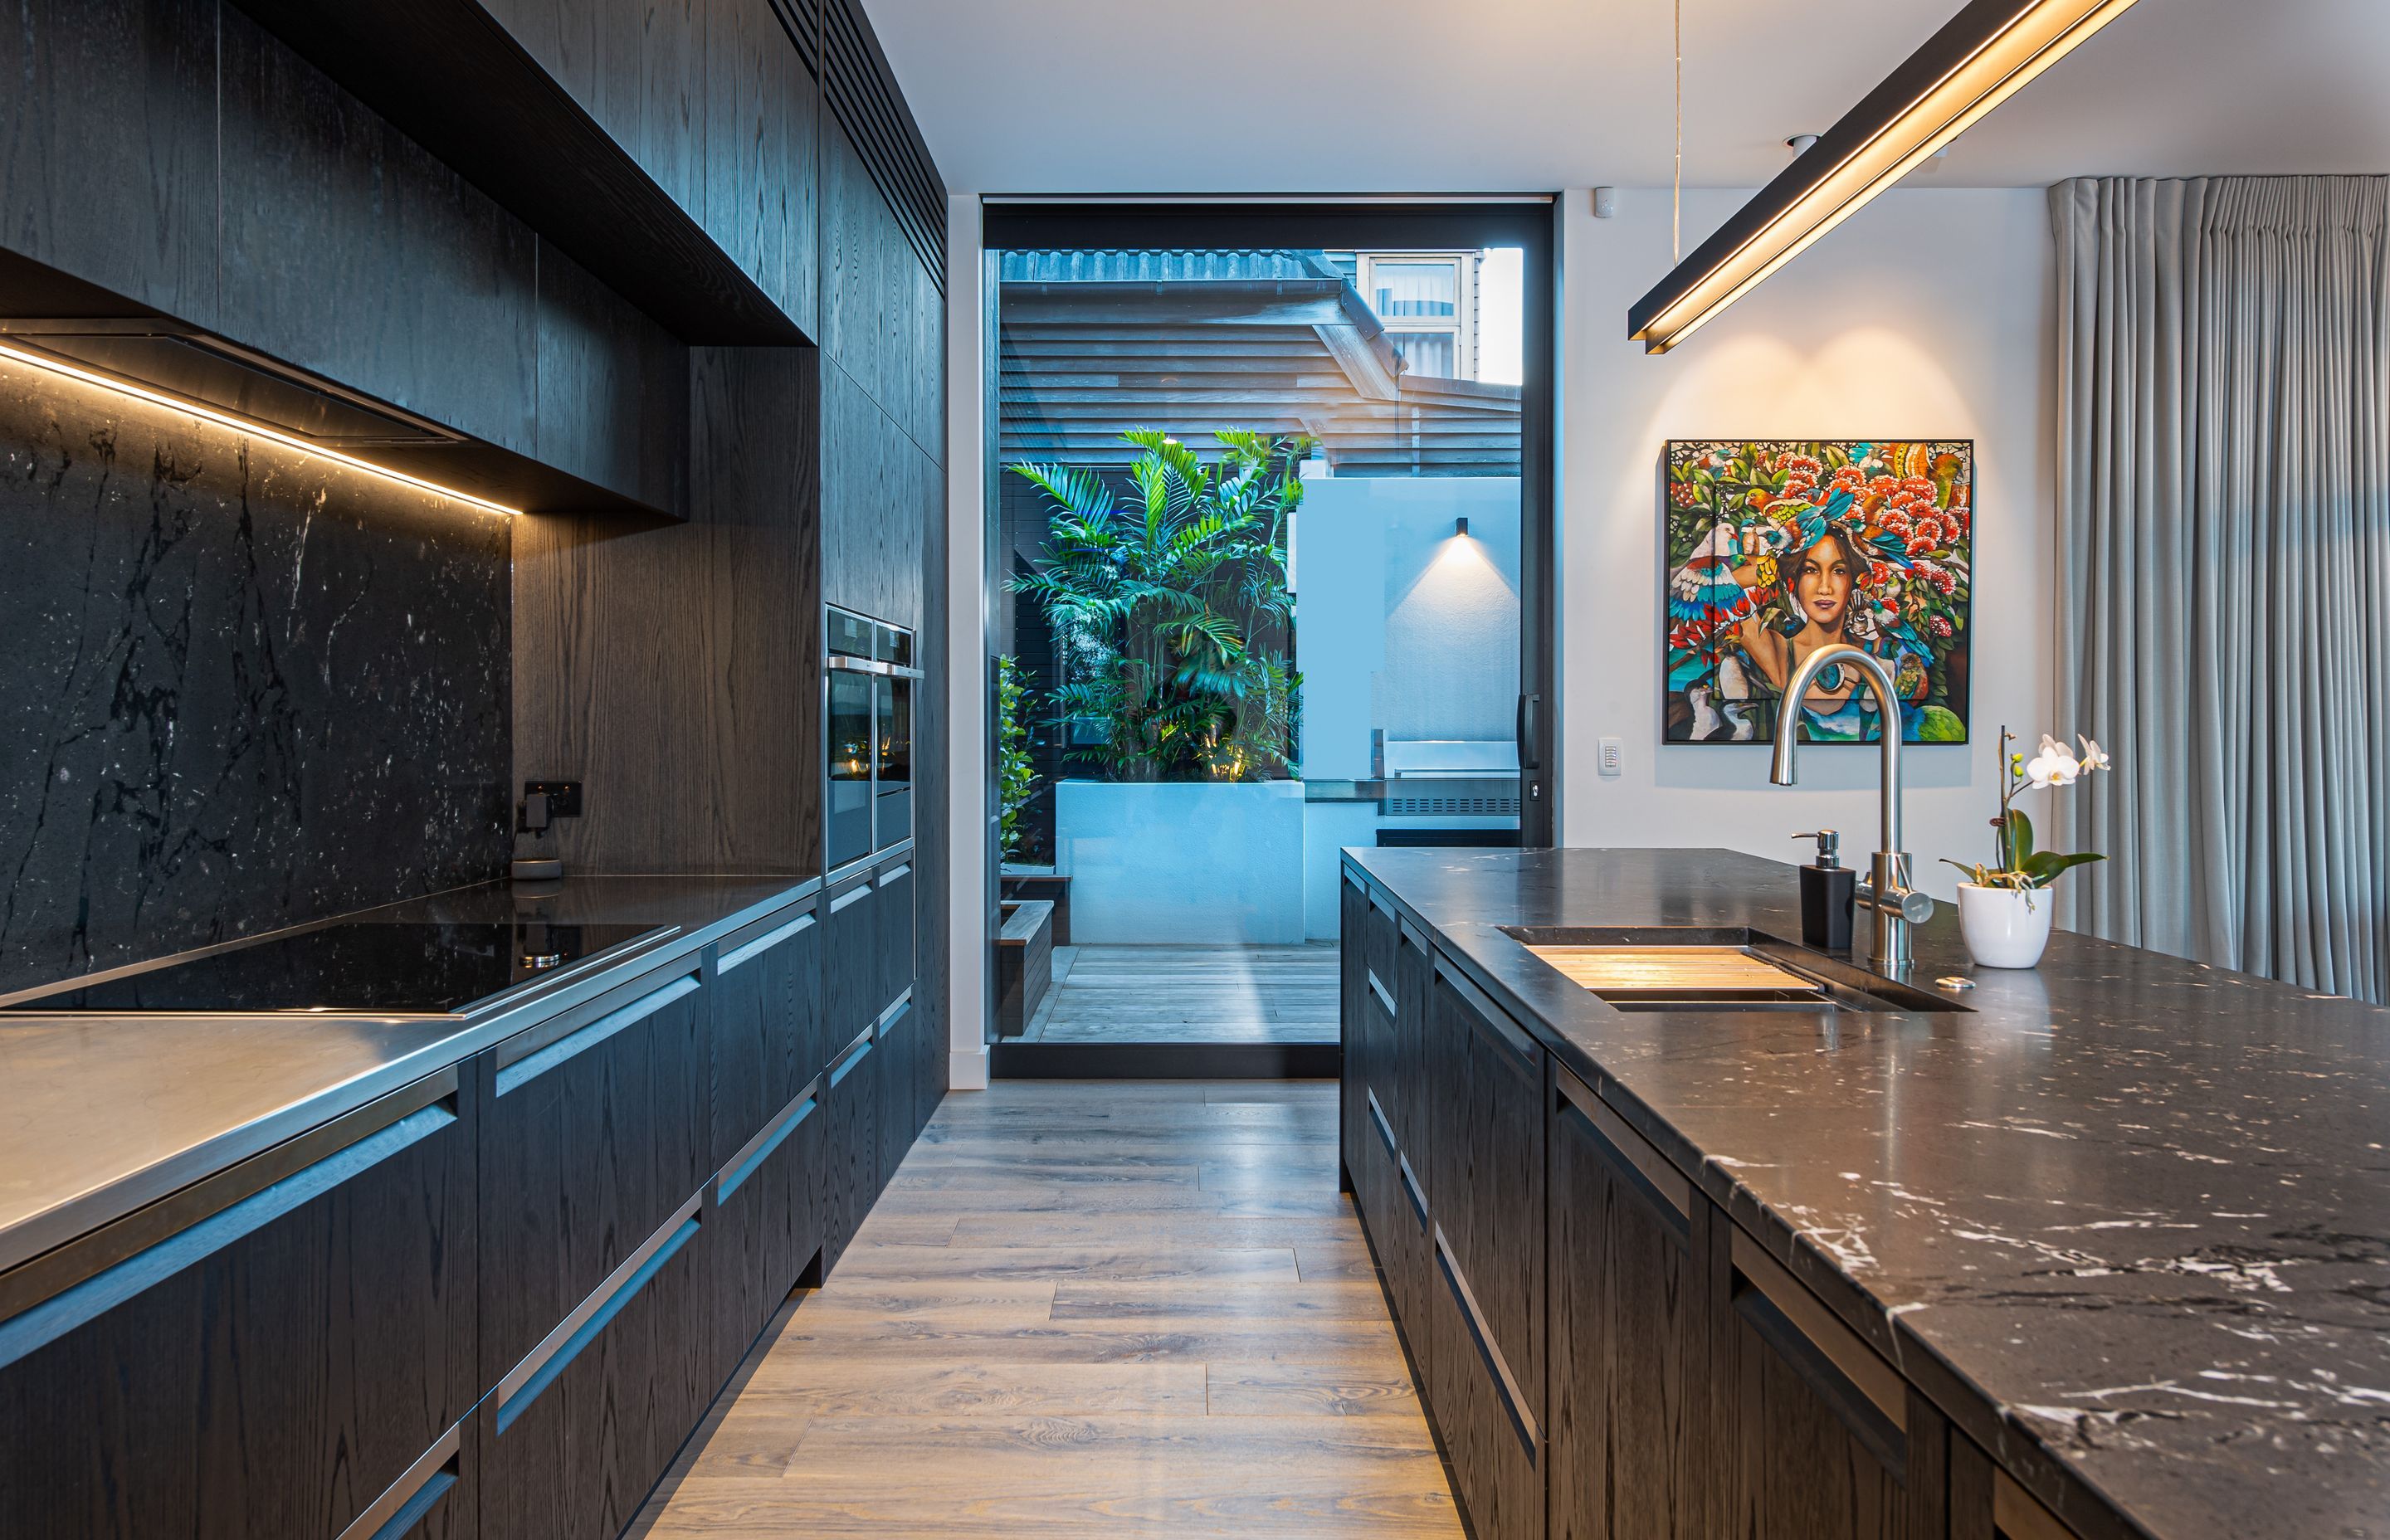 A deeply patterned stone was chosen for the island benchtop and the splash back, along with darkly stained timber cabinetry to continue the visual aesthetic established externally.